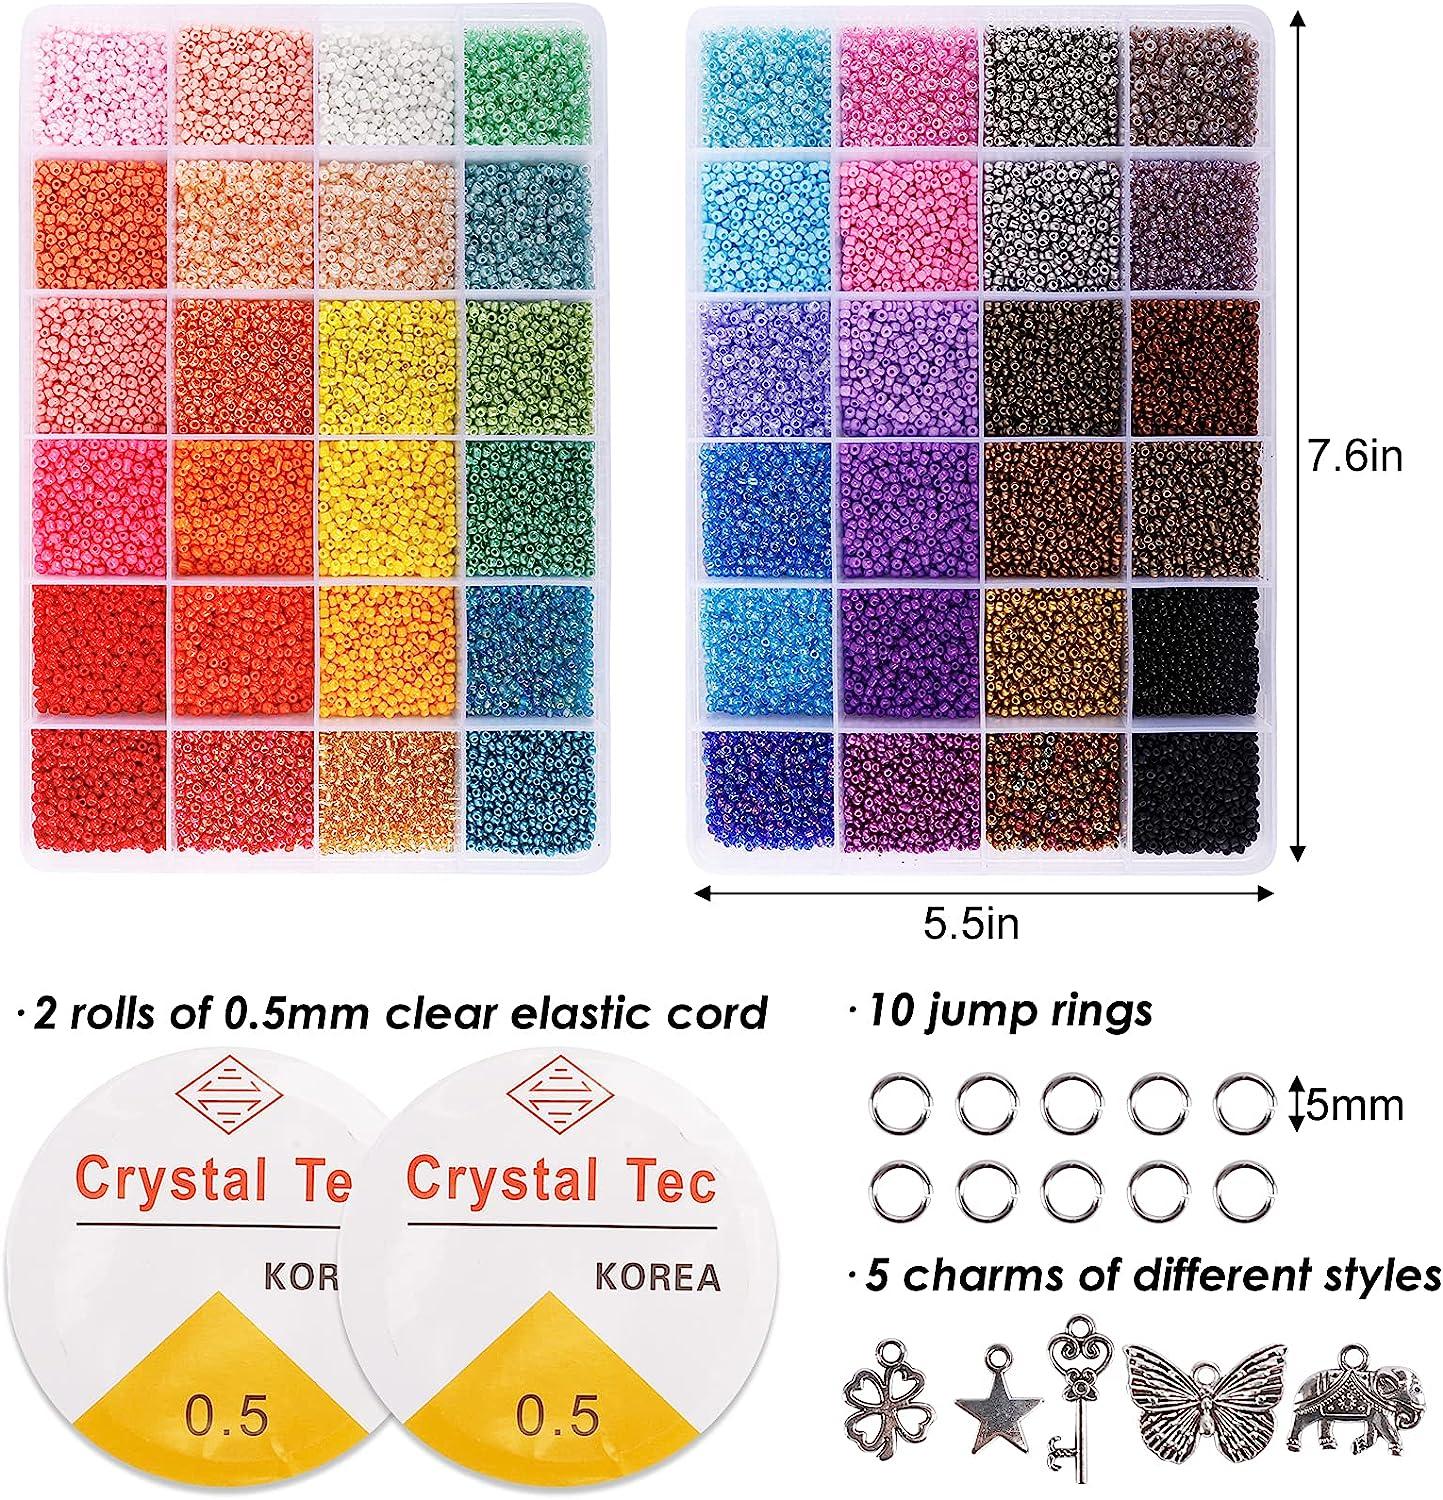 QUEFE 44000pcs 2mm 12/0 Glass Seed Beads for Bracelet Making Kit 48 Colors  Small Beads Craft Beads Kit for Jewelry Making with 2 Storage Boxes Charms  Jump Rings and Clear Elastic String Cord